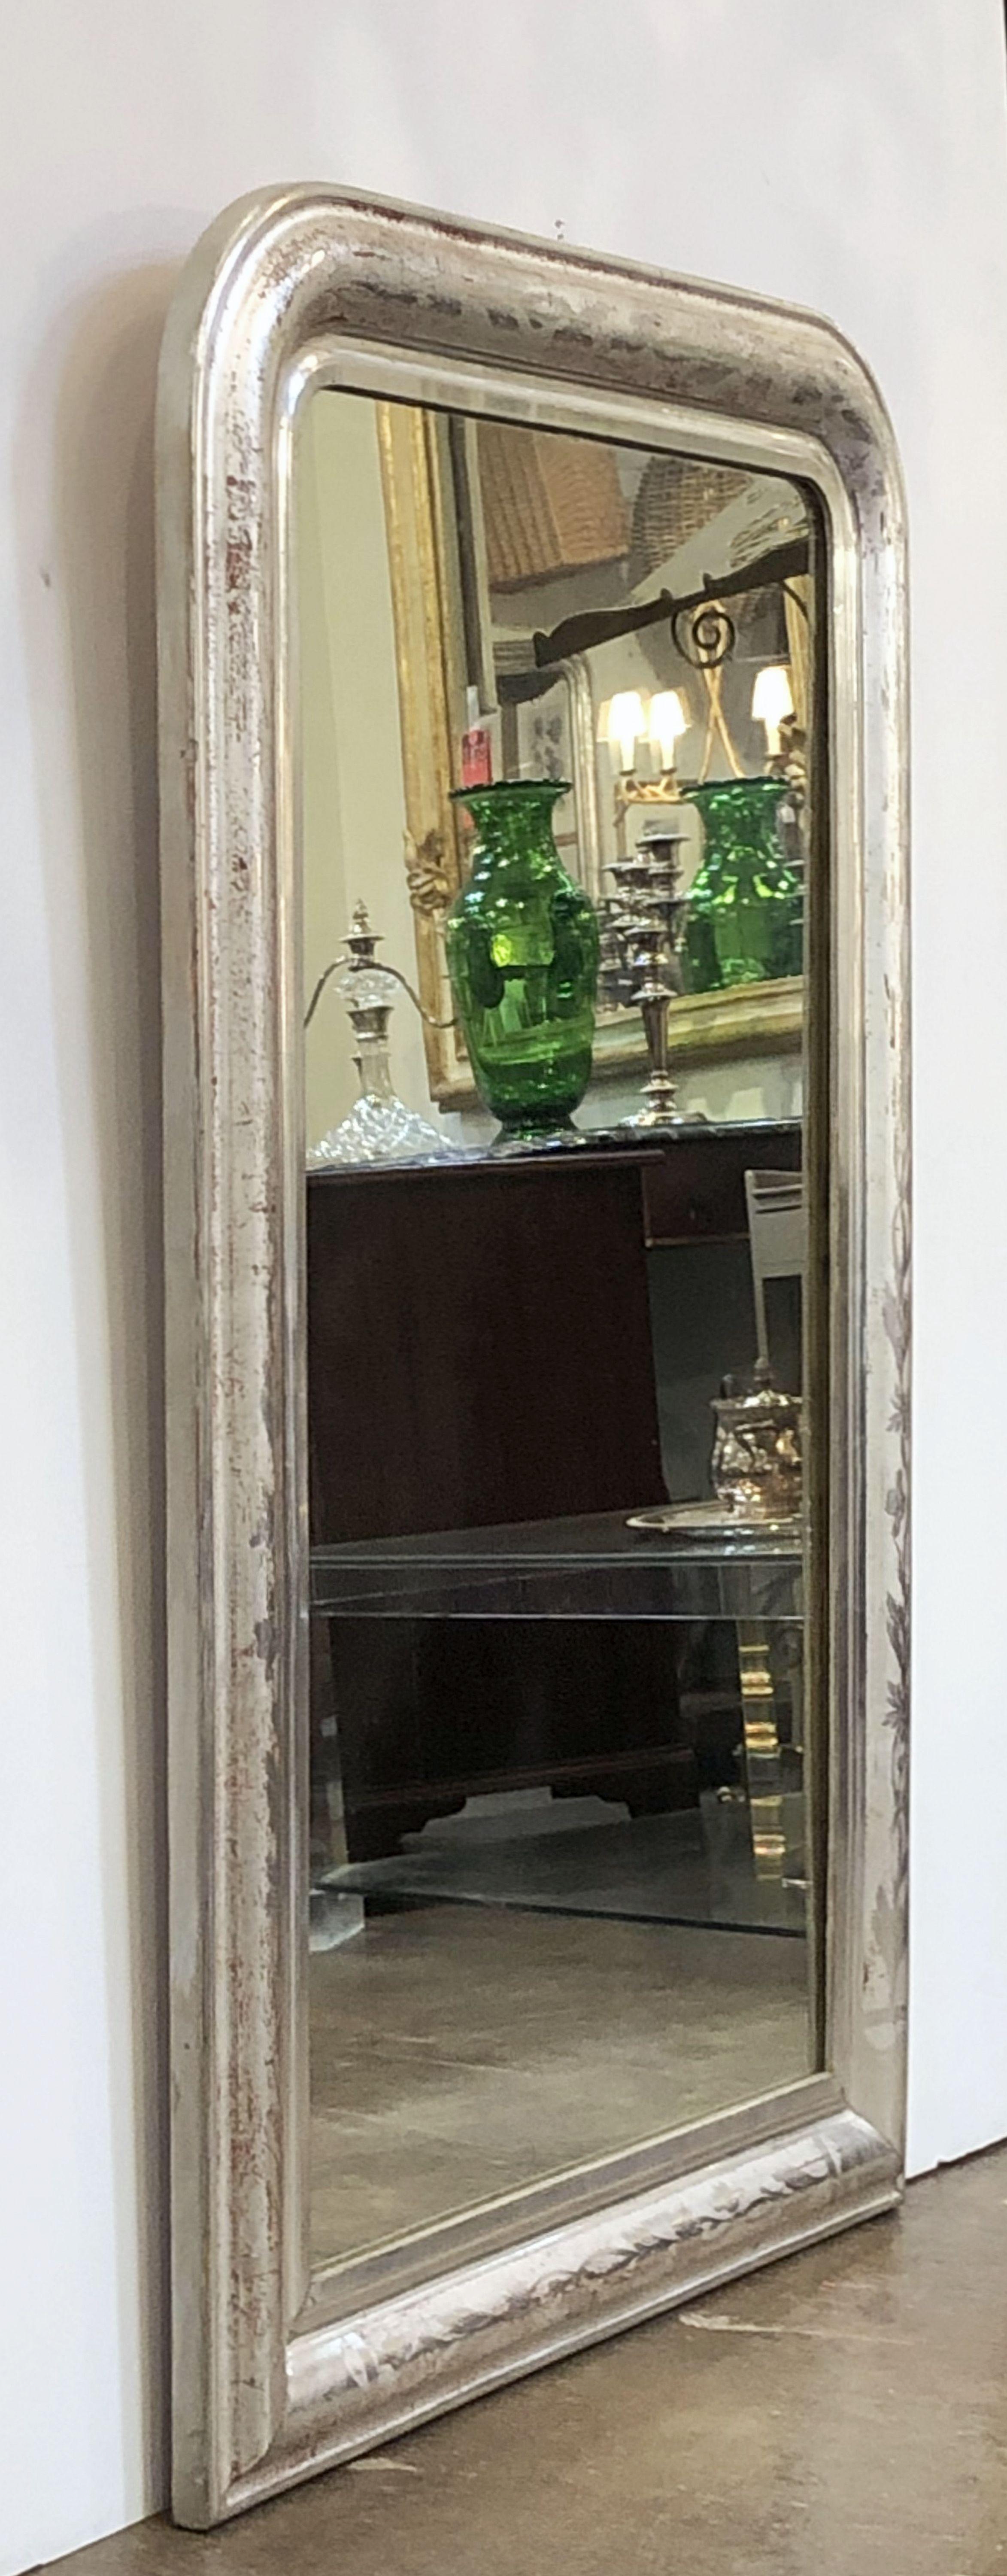 A fine large Louis Philippe wall mirror featuring a moulded surround with a beautiful patinated silver-leaf.

Dimensions: H 43 3/4 inches x W 29 3/8 inches

Other sizes available in this style.